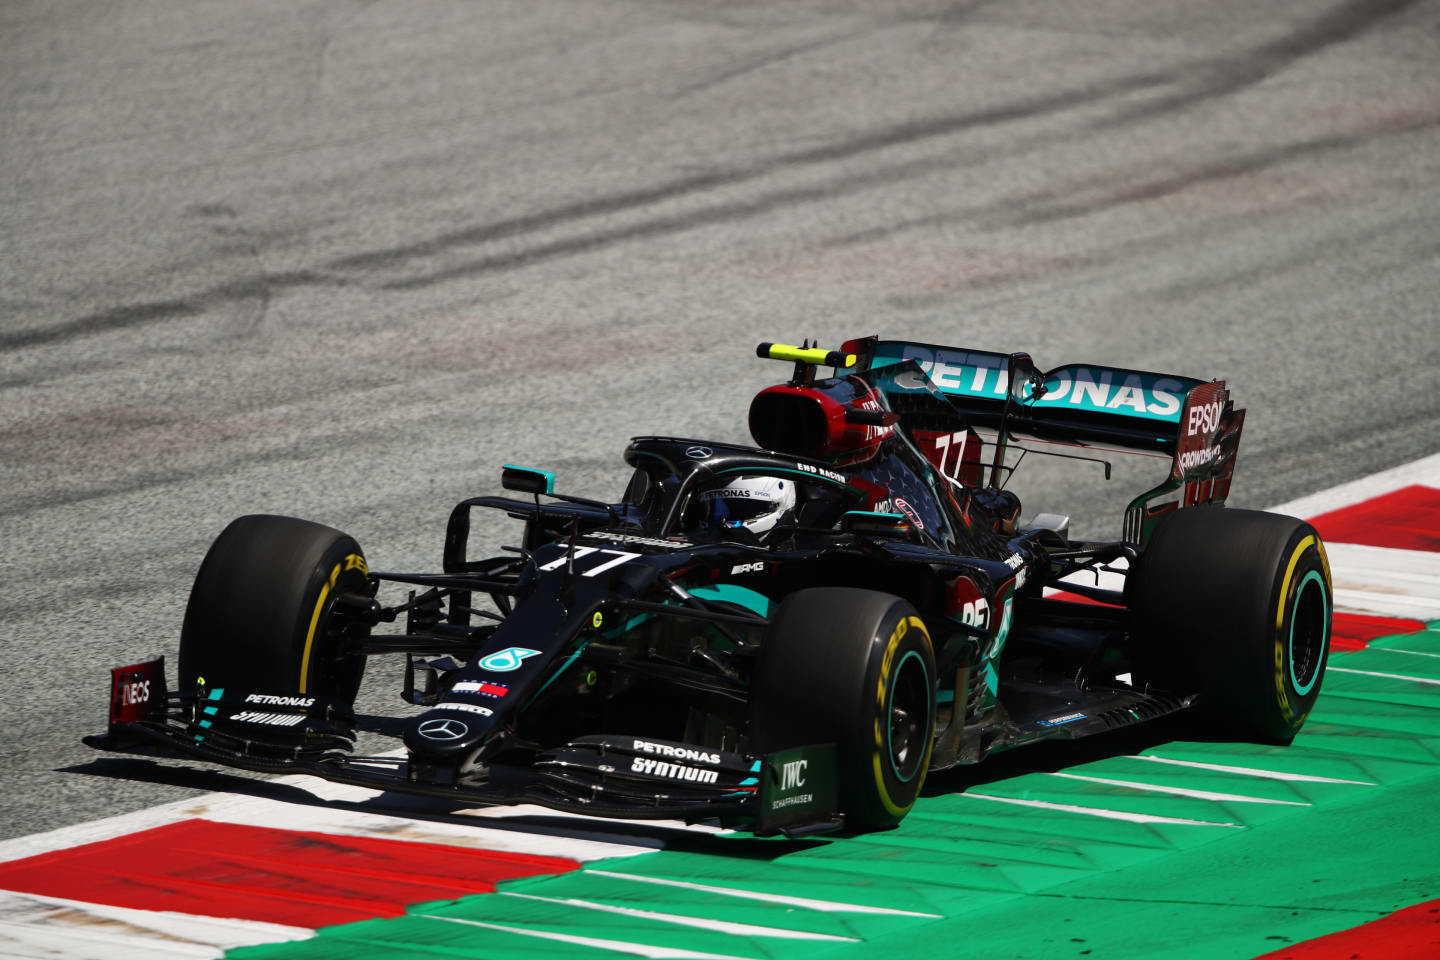 SPIELBERG, AUSTRIA - JULY 10: Valtteri Bottas of Finland driving the (77) Mercedes AMG Petronas F1 Team Mercedes W11 on track during practice for the F1 Grand Prix of Styria at Red Bull Ring on July 10, 2020 in Spielberg, Austria. (Photo by Bryn Lennon/Getty Images)